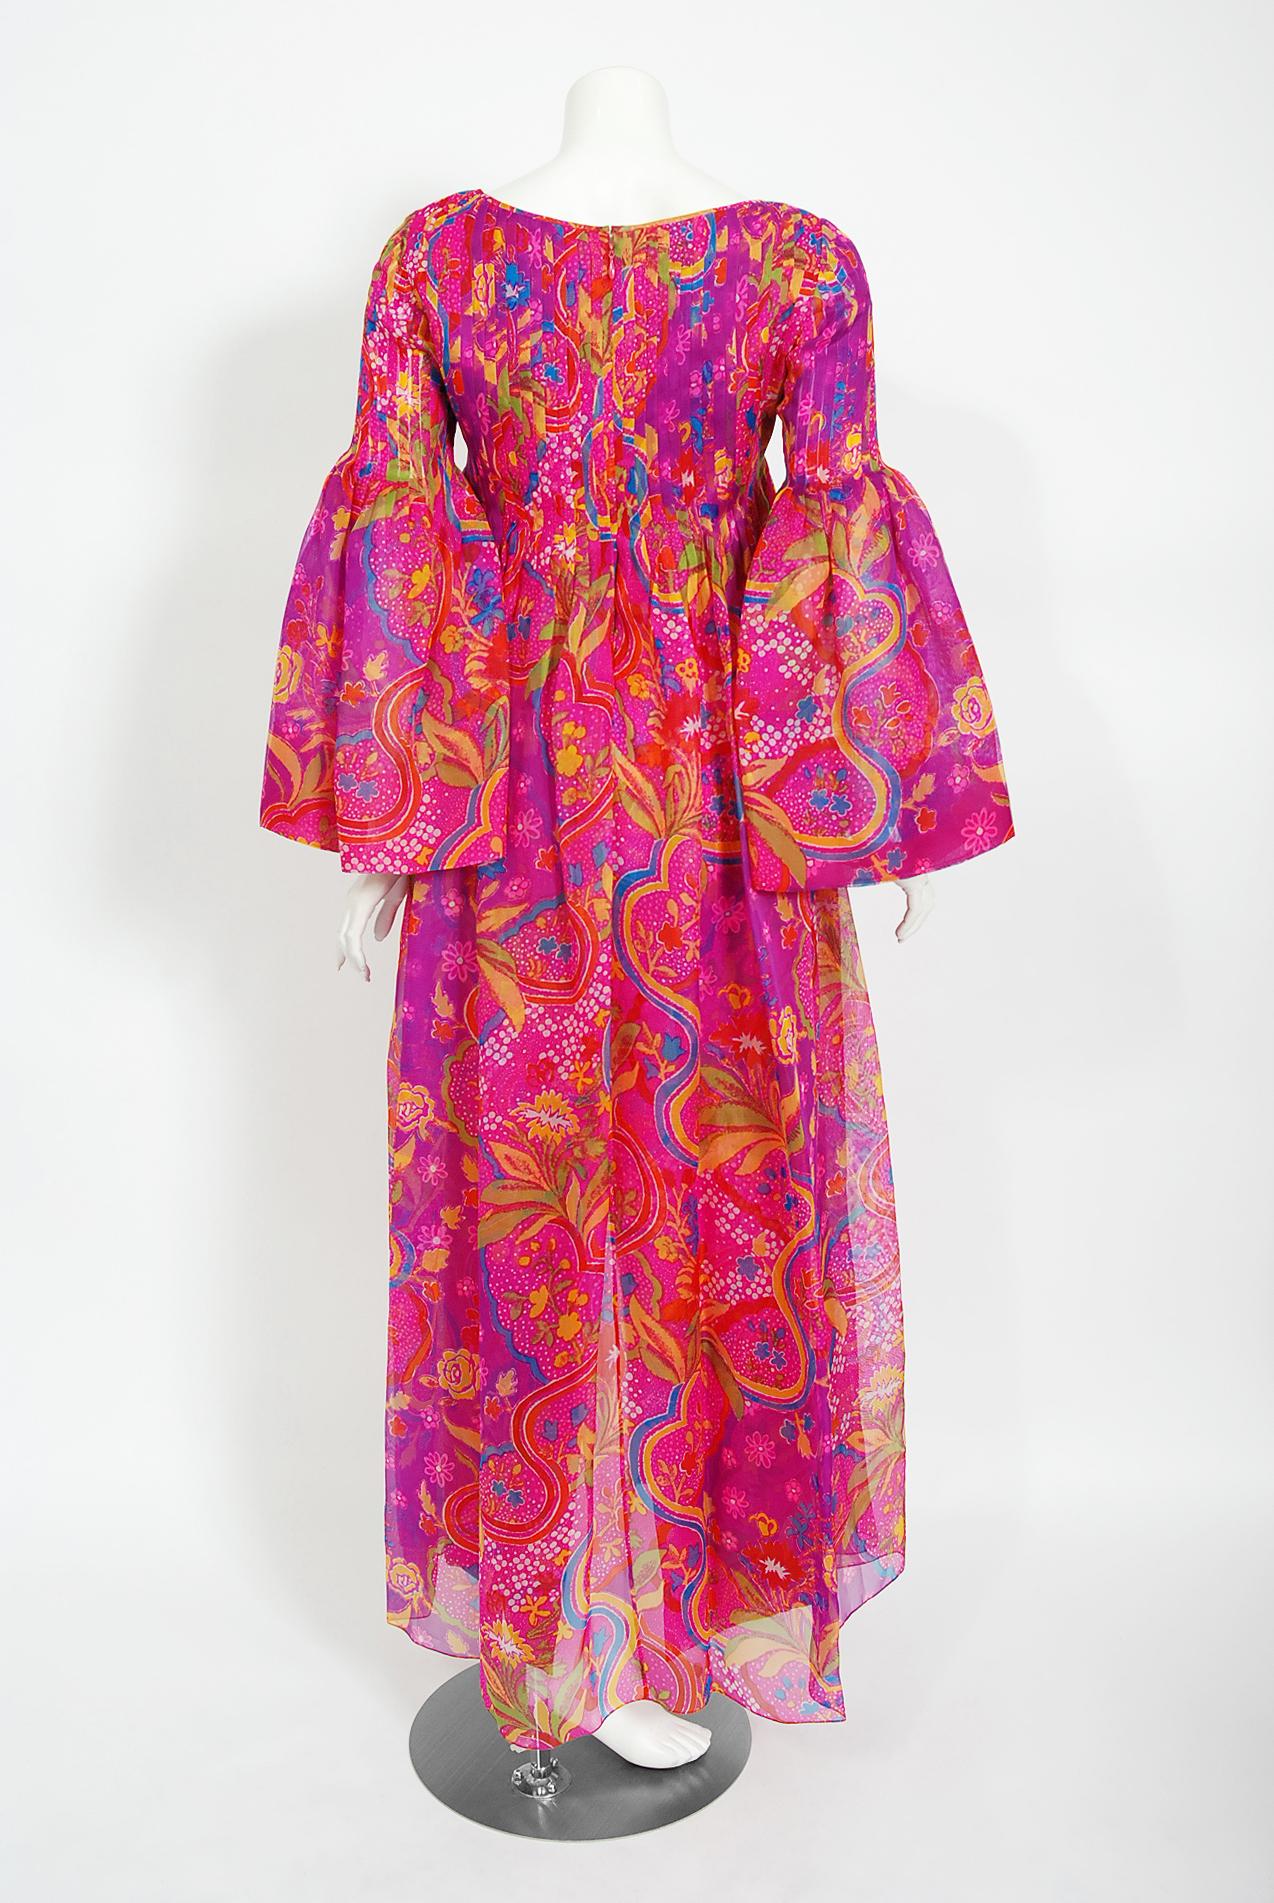 Vintage 1969 Pierre Cardin Pink Psychedelic Print Organza Bell-Sleeve Maxi Dress 1